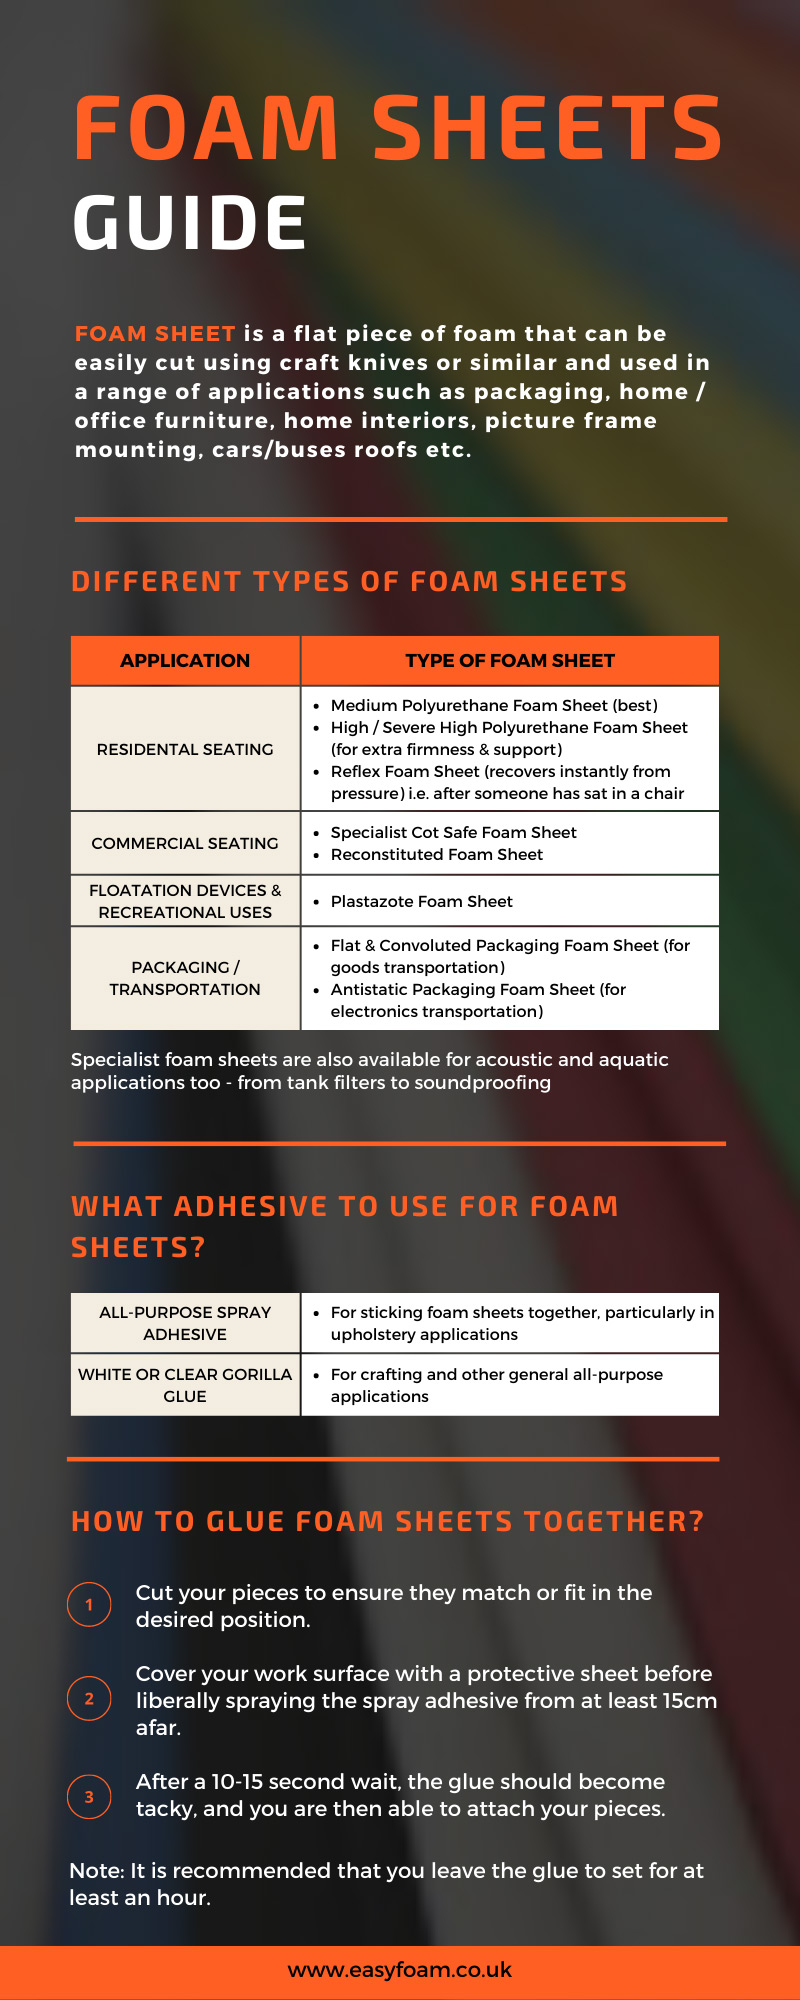 foam sheets guide infographic